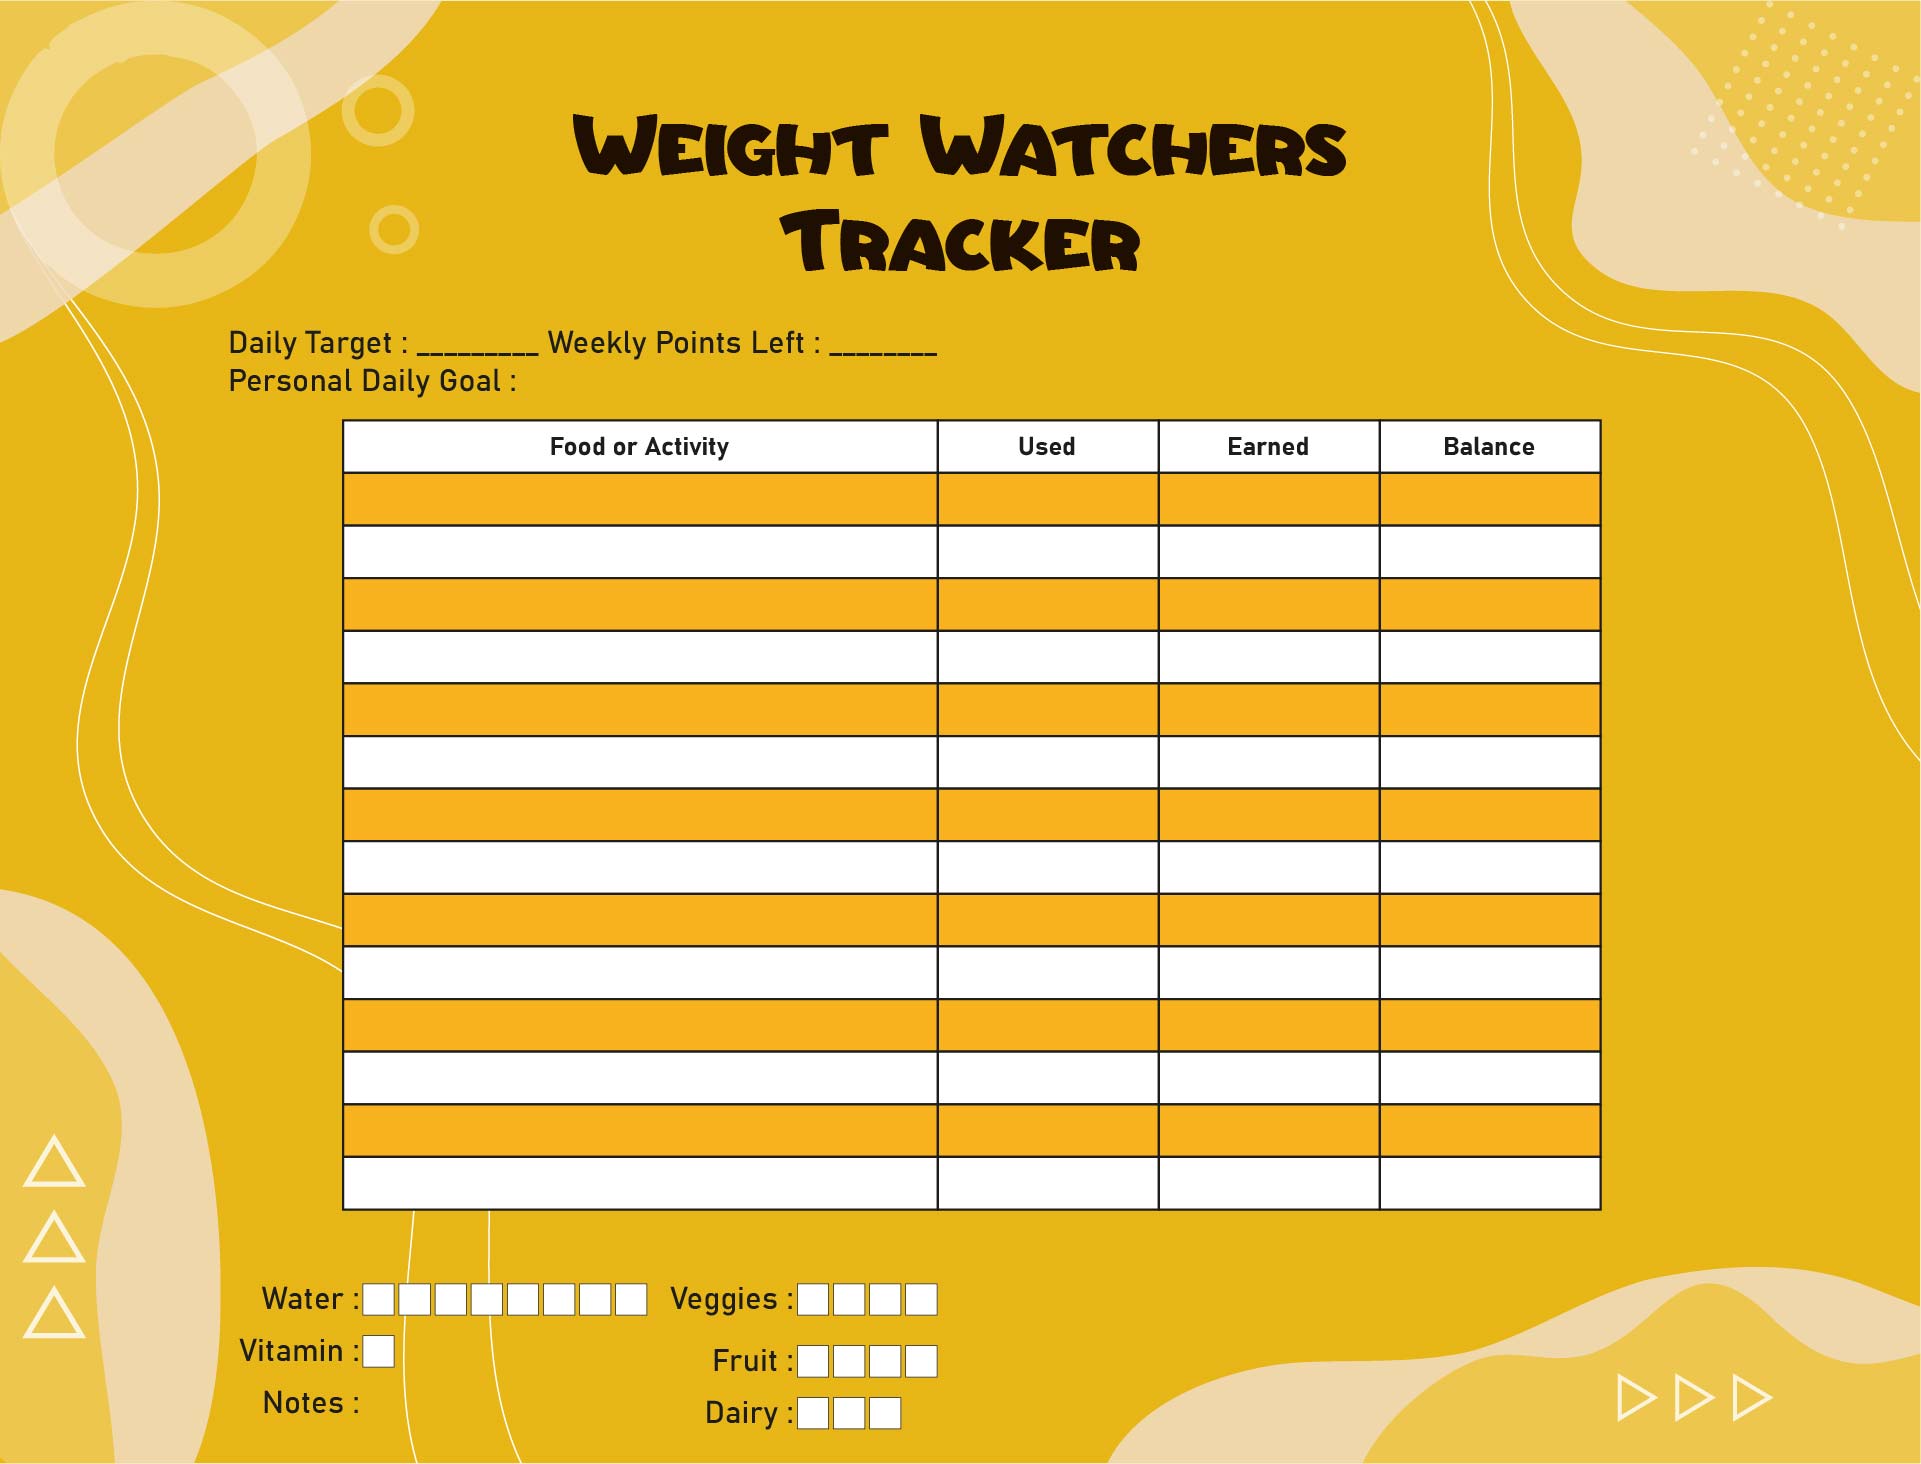 Weight Watchers Weekly Points Tracker Free Printable - STOCKPILING MOMS™